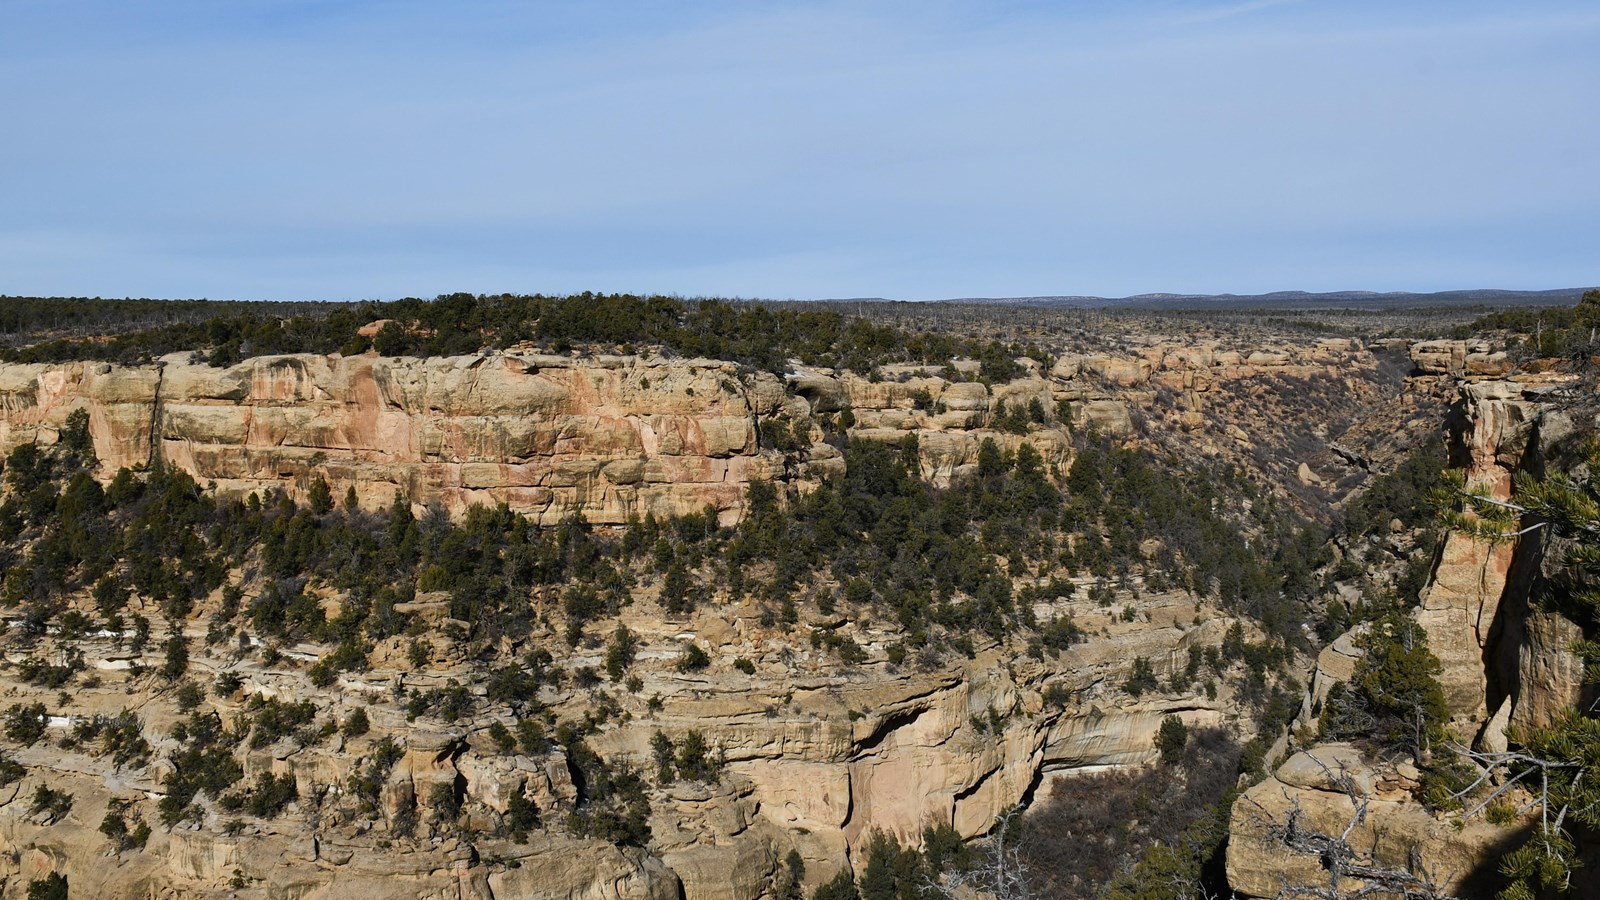 Cliff canyon stretches out across the landscape. Junipers and pinyon pines dot the sandstone slopes.